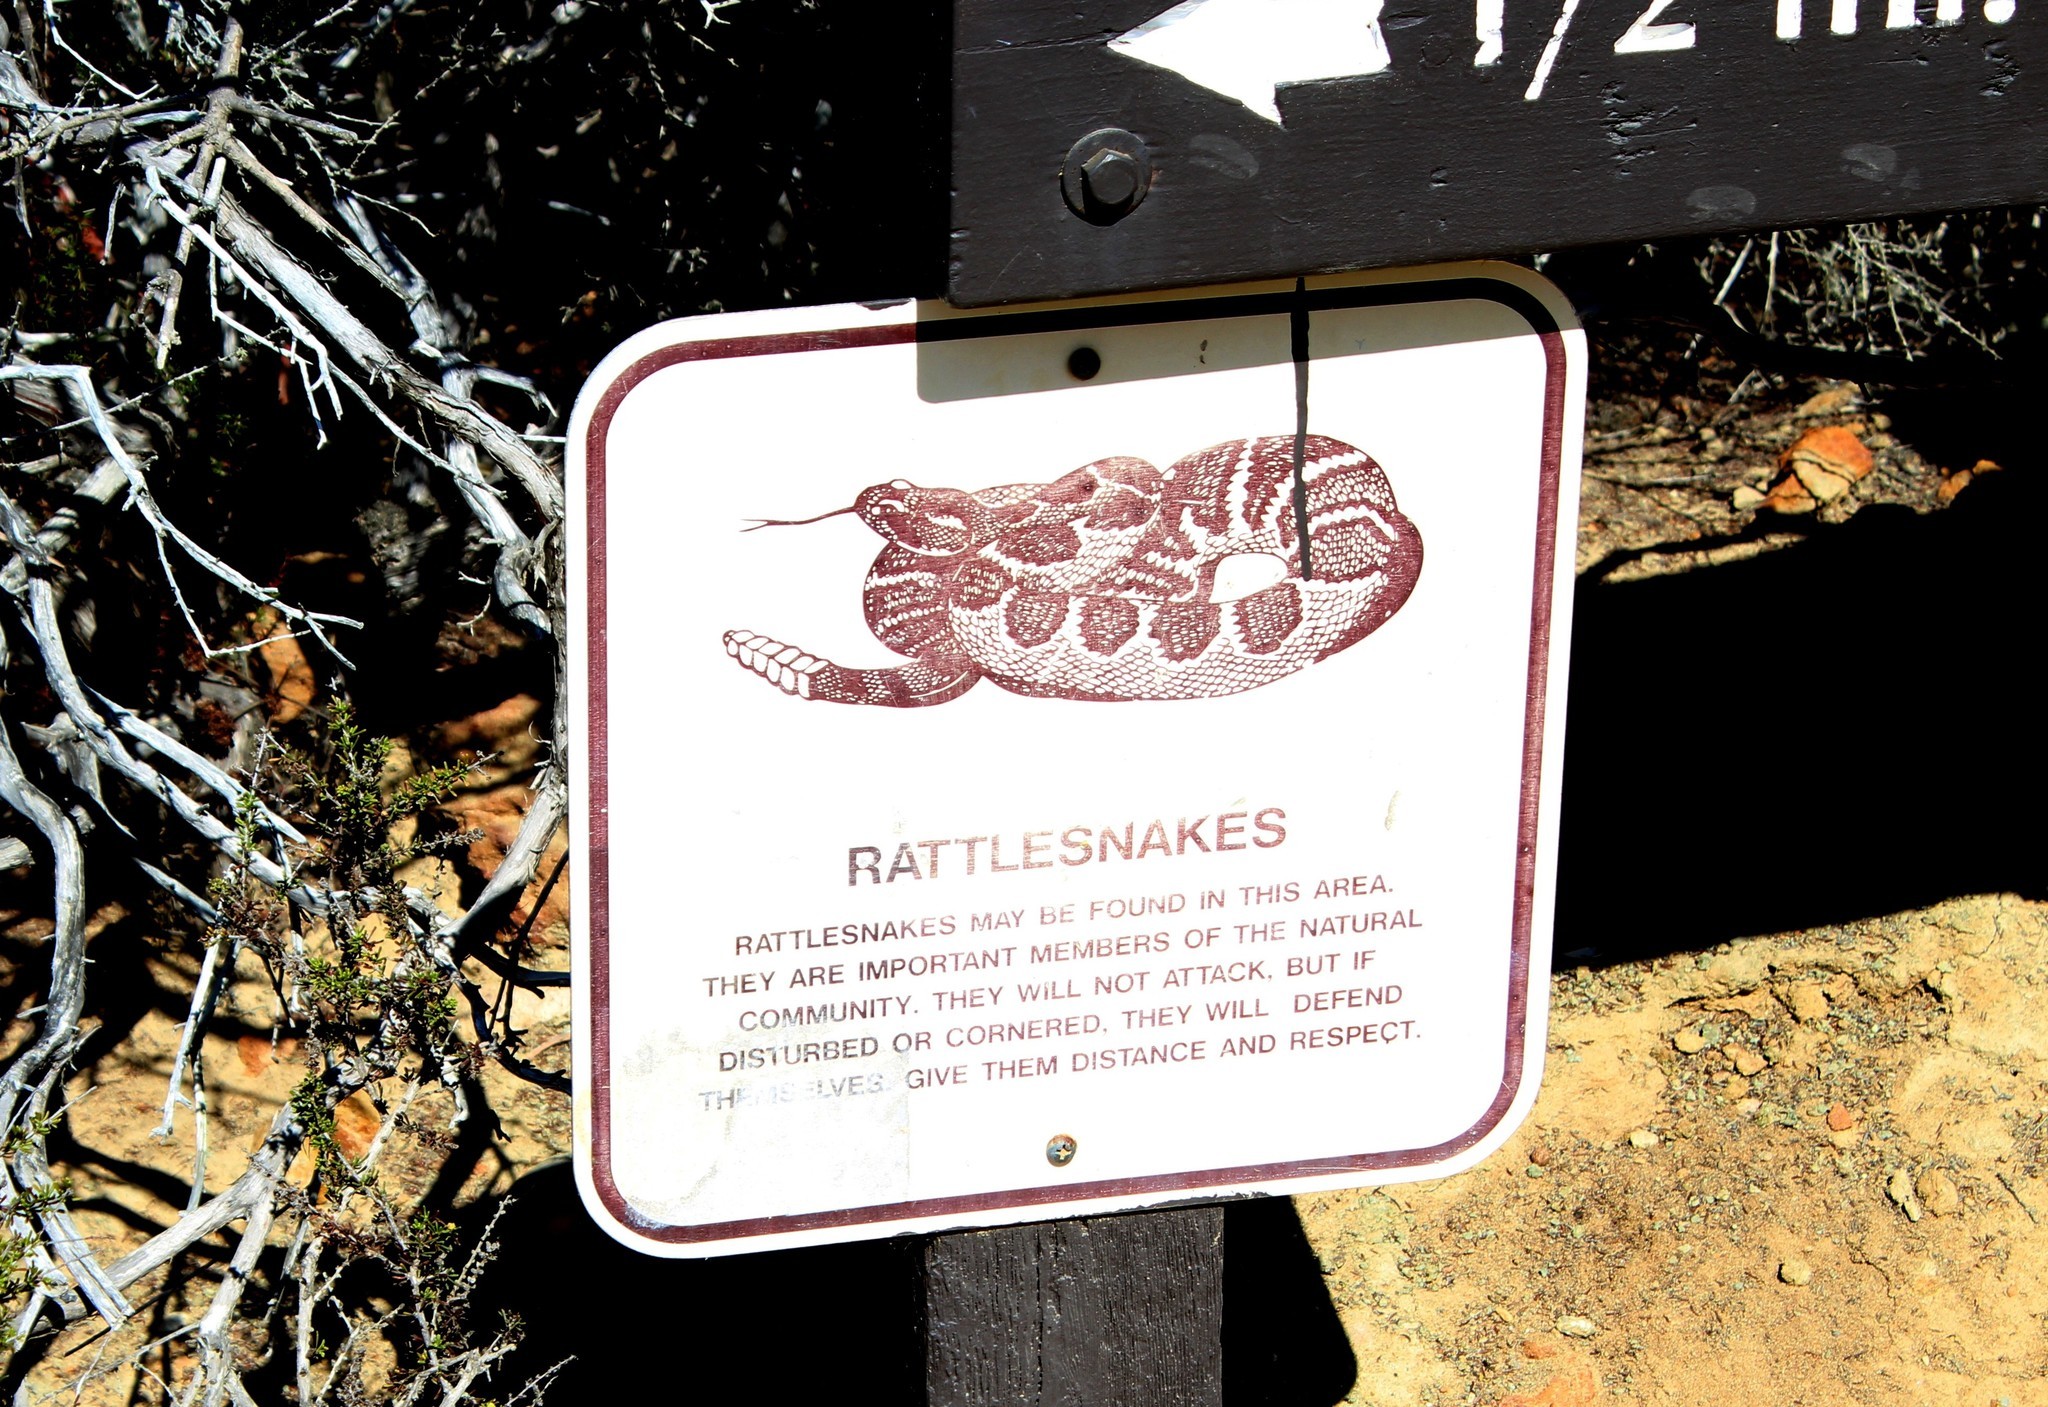 The rendering of a snake posted on warning signs all over Torrey Pines State Nature Reserve represents a Western Rattlesnake.